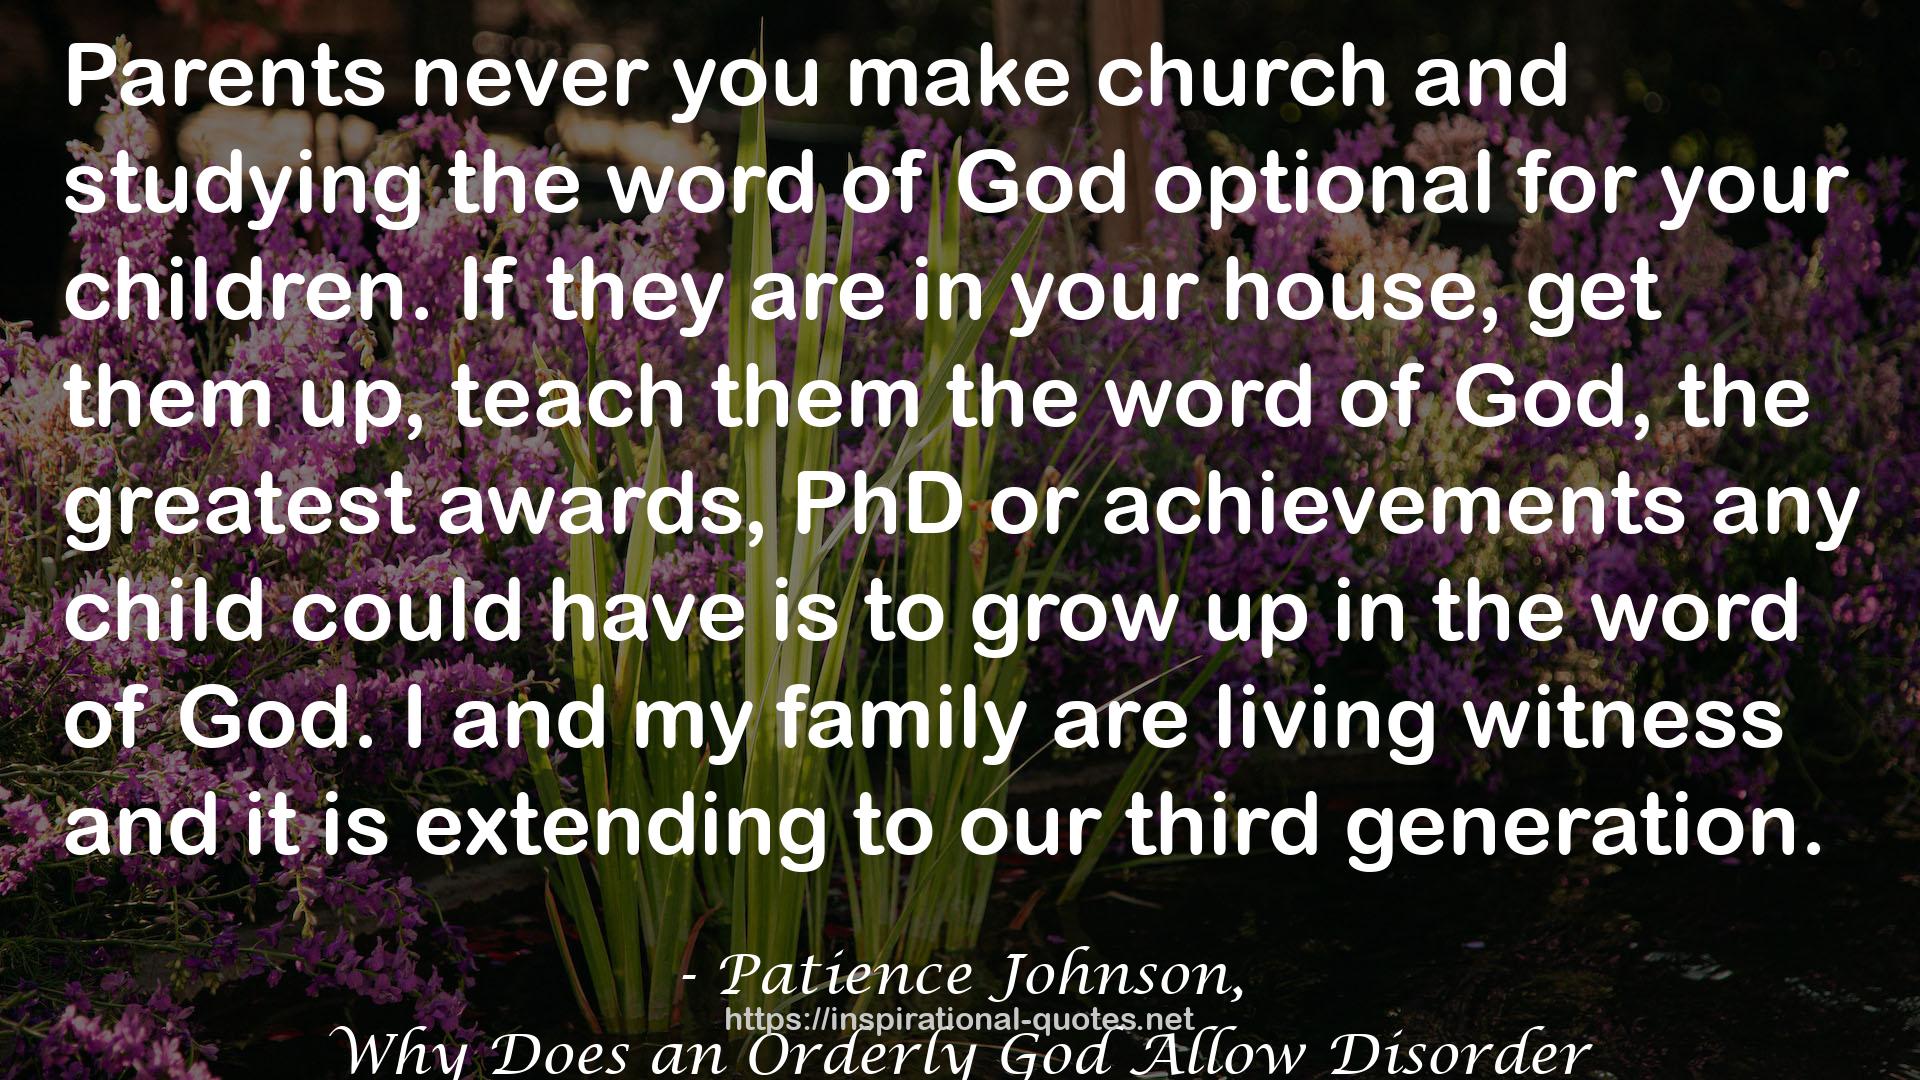 Patience Johnson, QUOTES